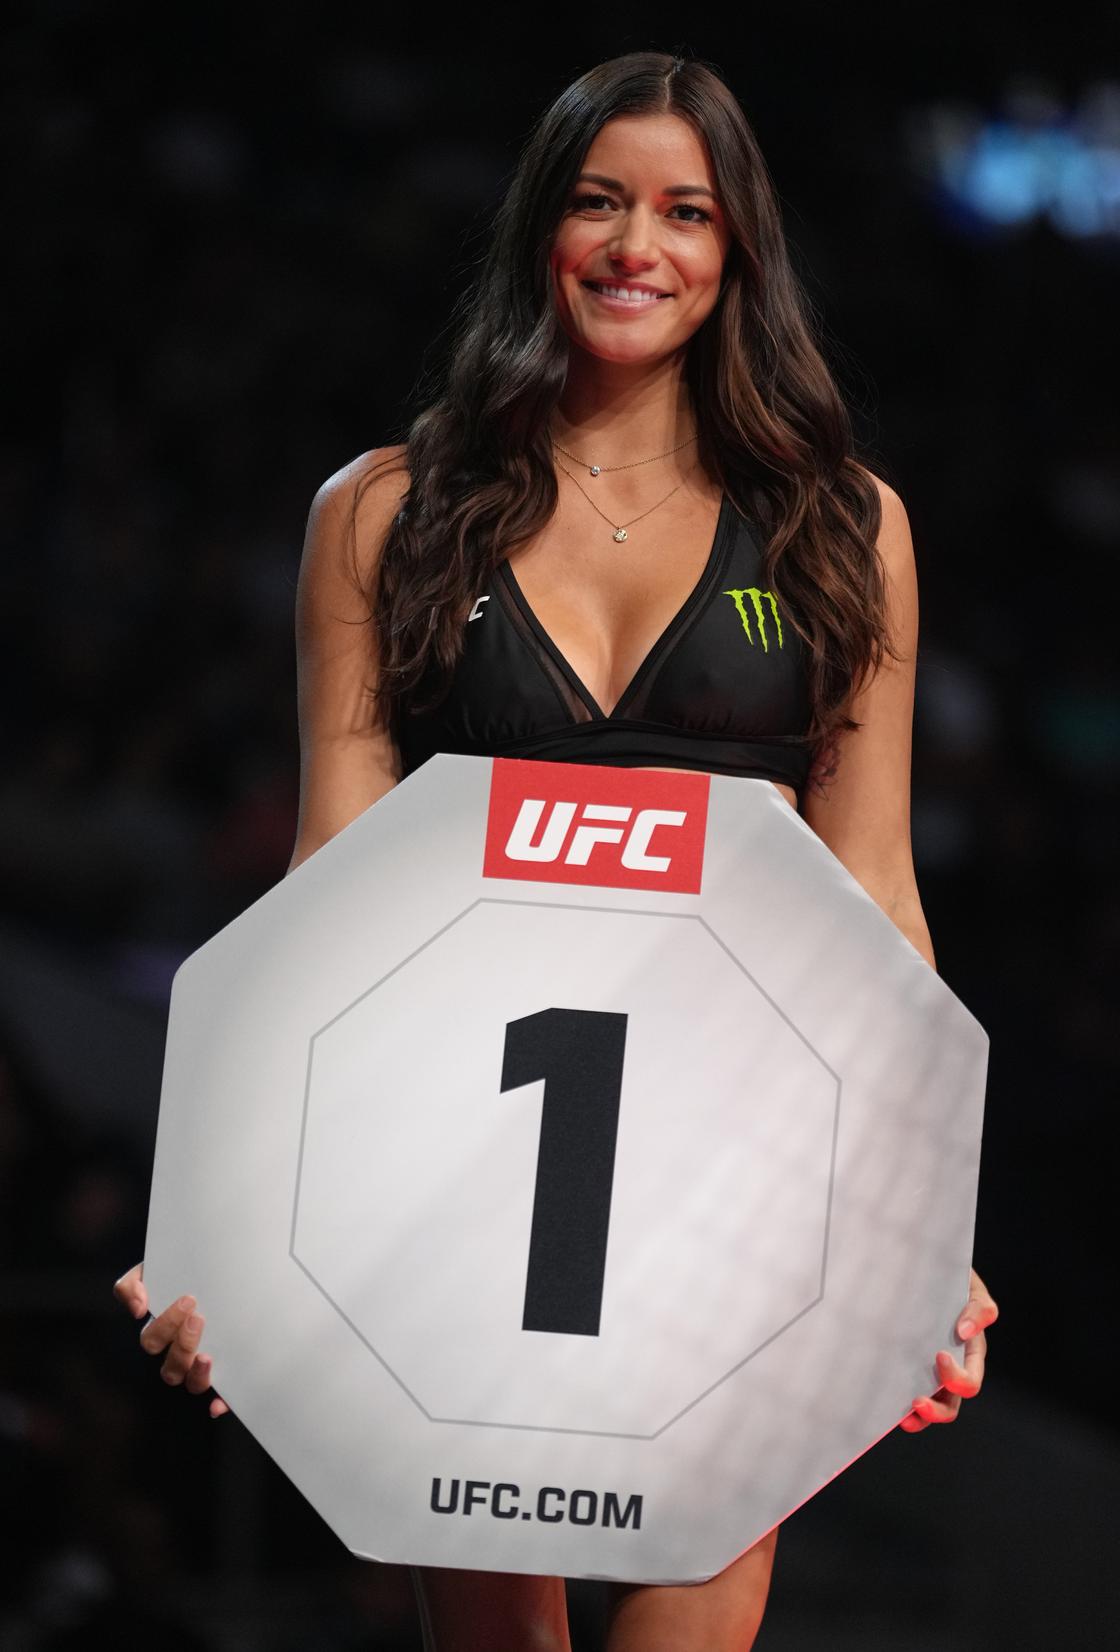 How much does a UFC ring girl get paid?